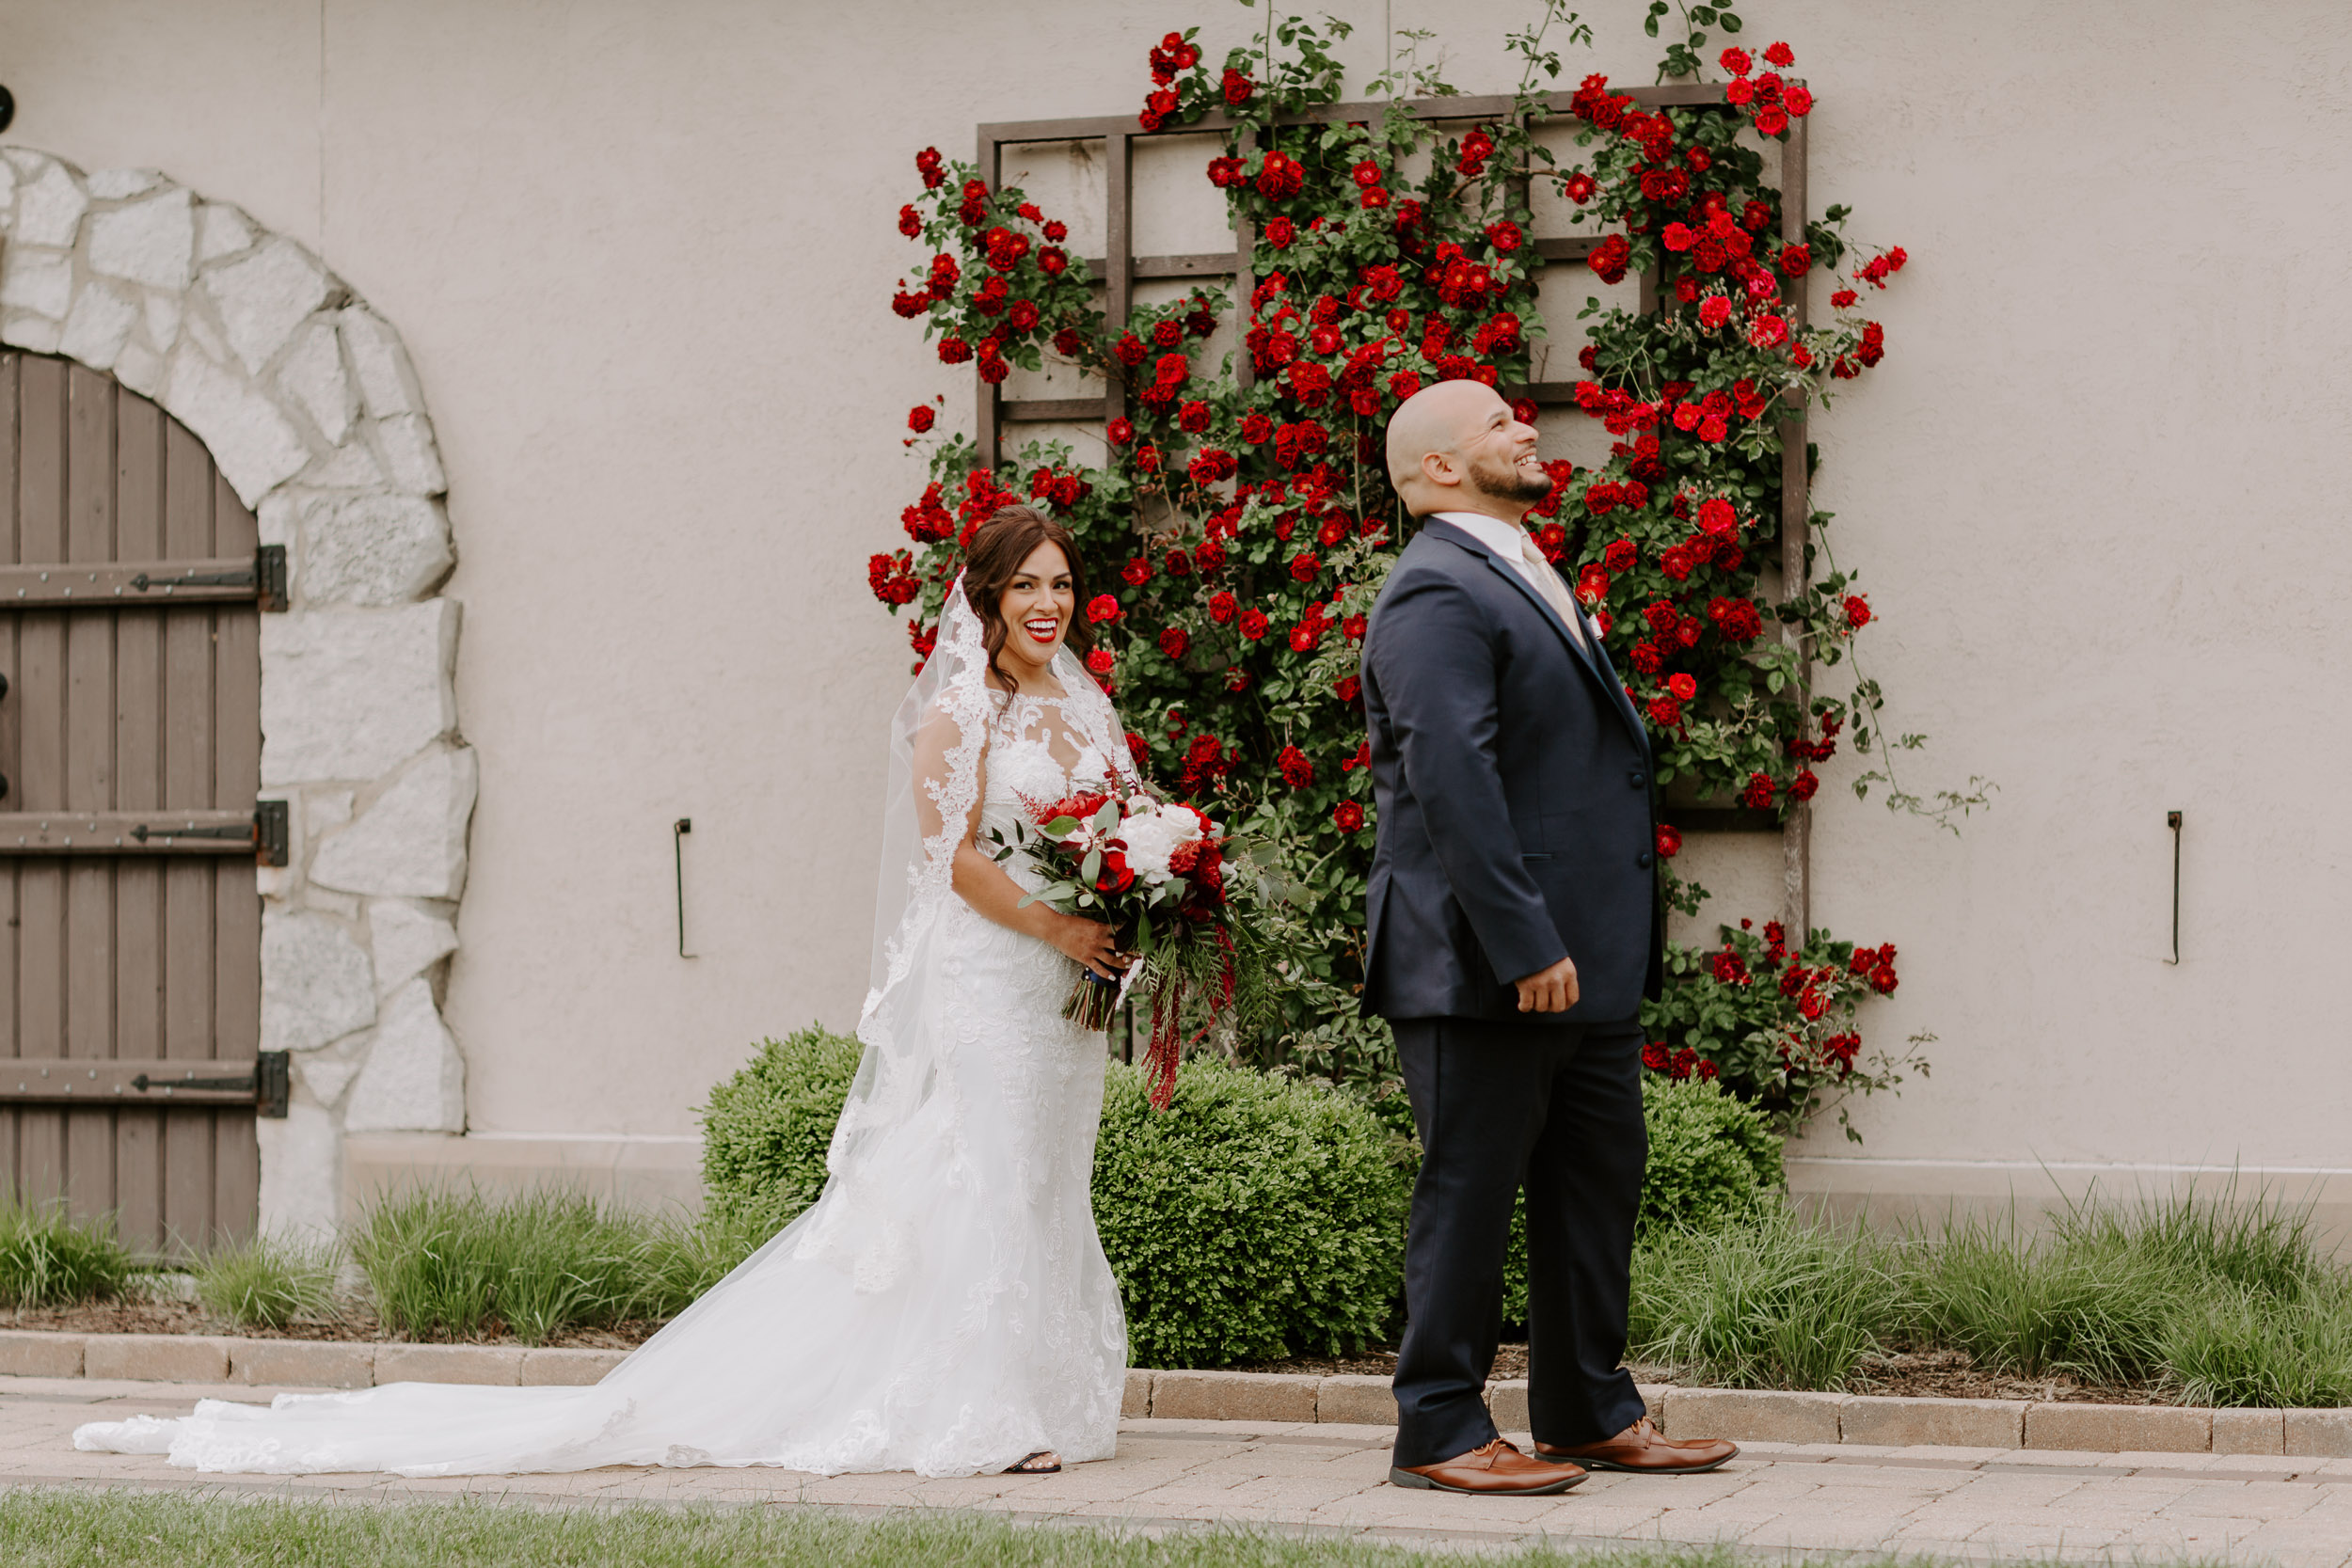 Romantic First Look In Front of Wall of Red Flowers | Mistwood Golf Club Wedding | Chicagoland Country Club Weddings | Best Golf Courses for Weddings
